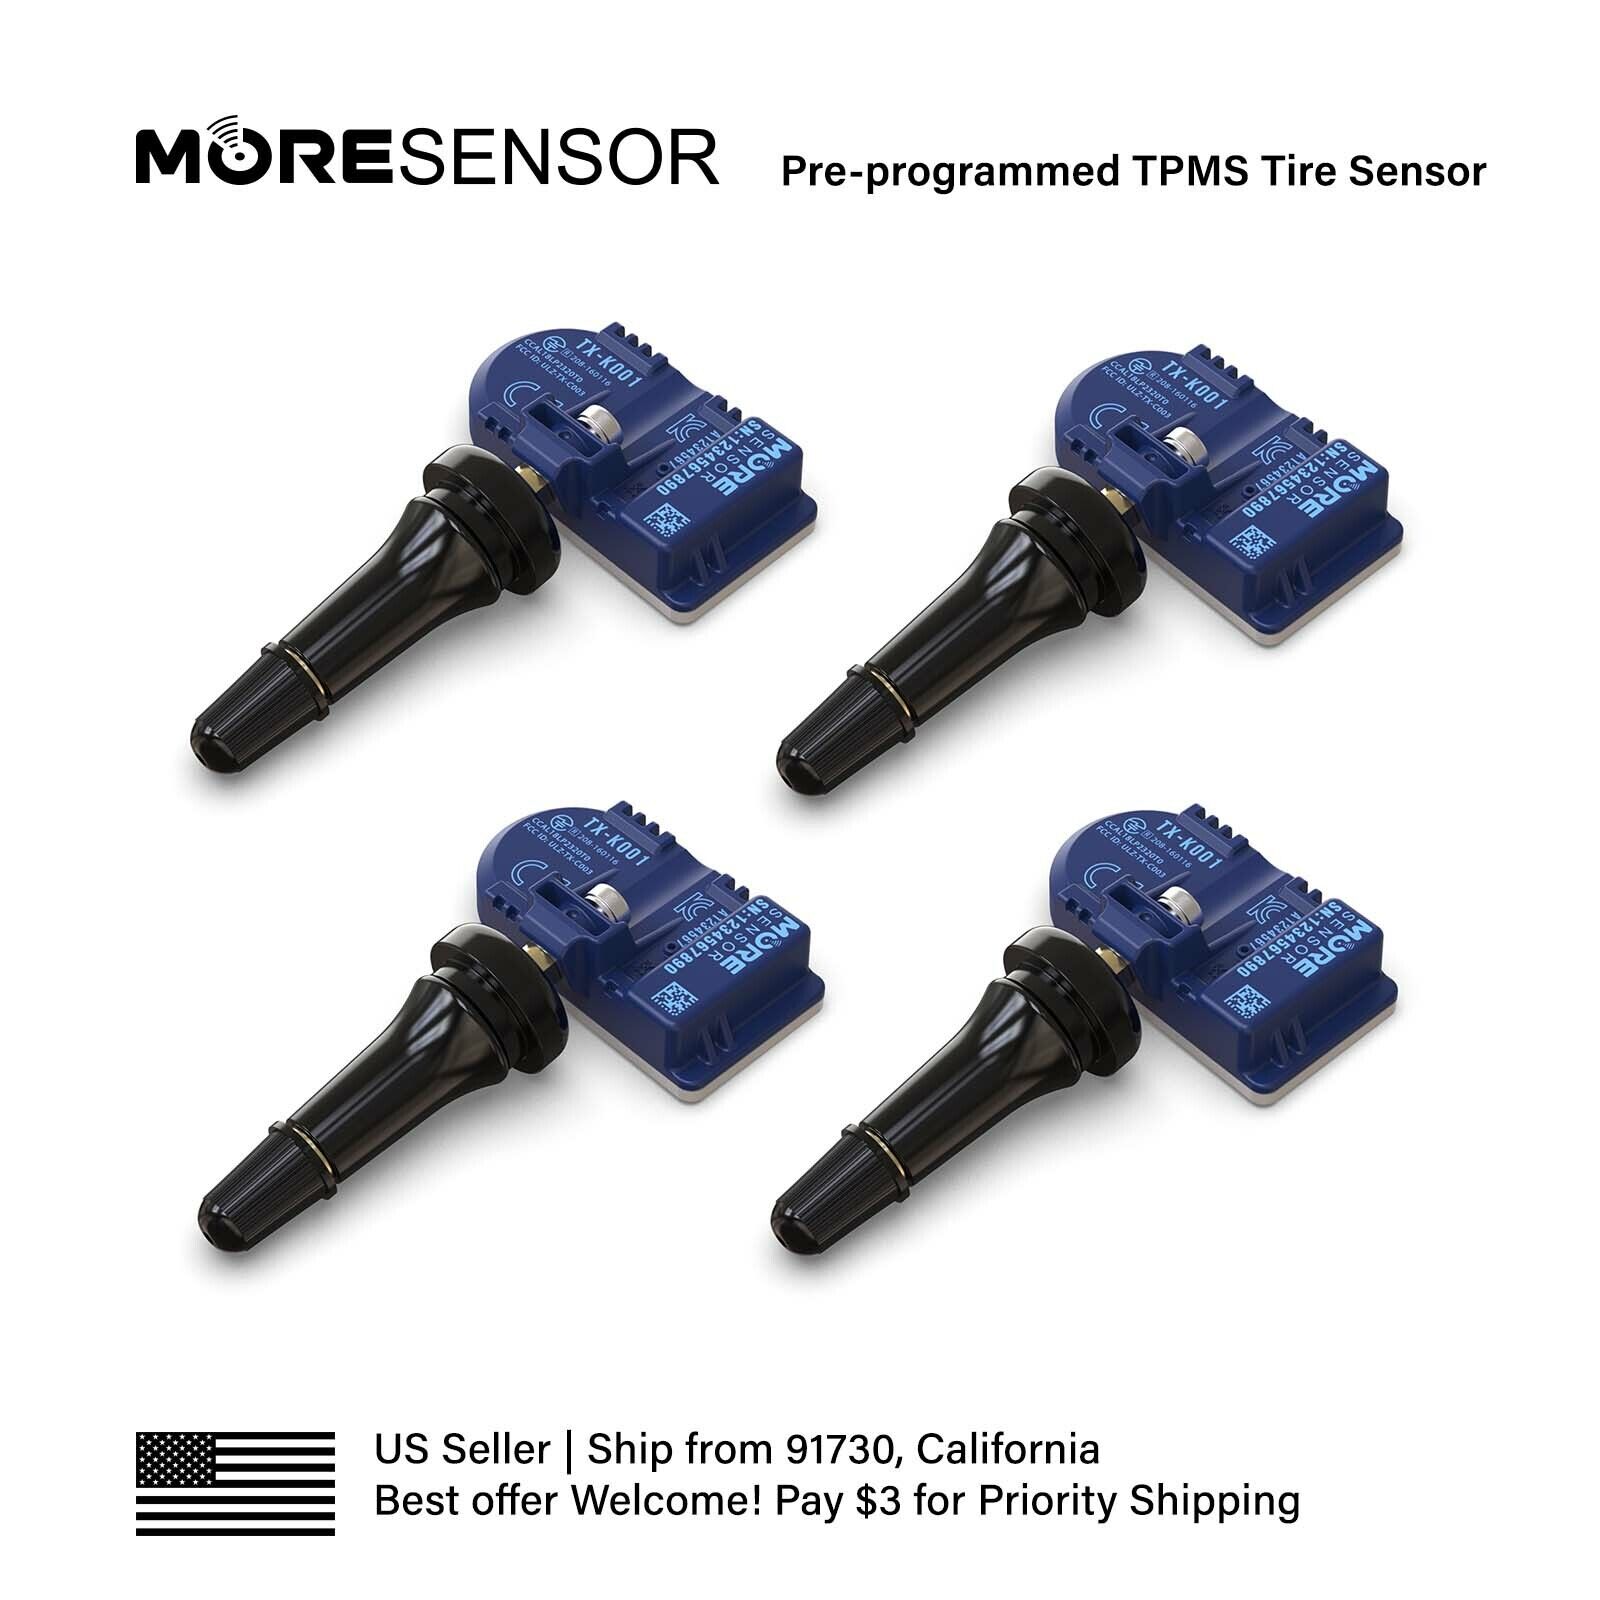 4PC 433MHz MORESENSOR TPMS Snap-in Tire Sensor for Pacifica Intrepid Crossfire